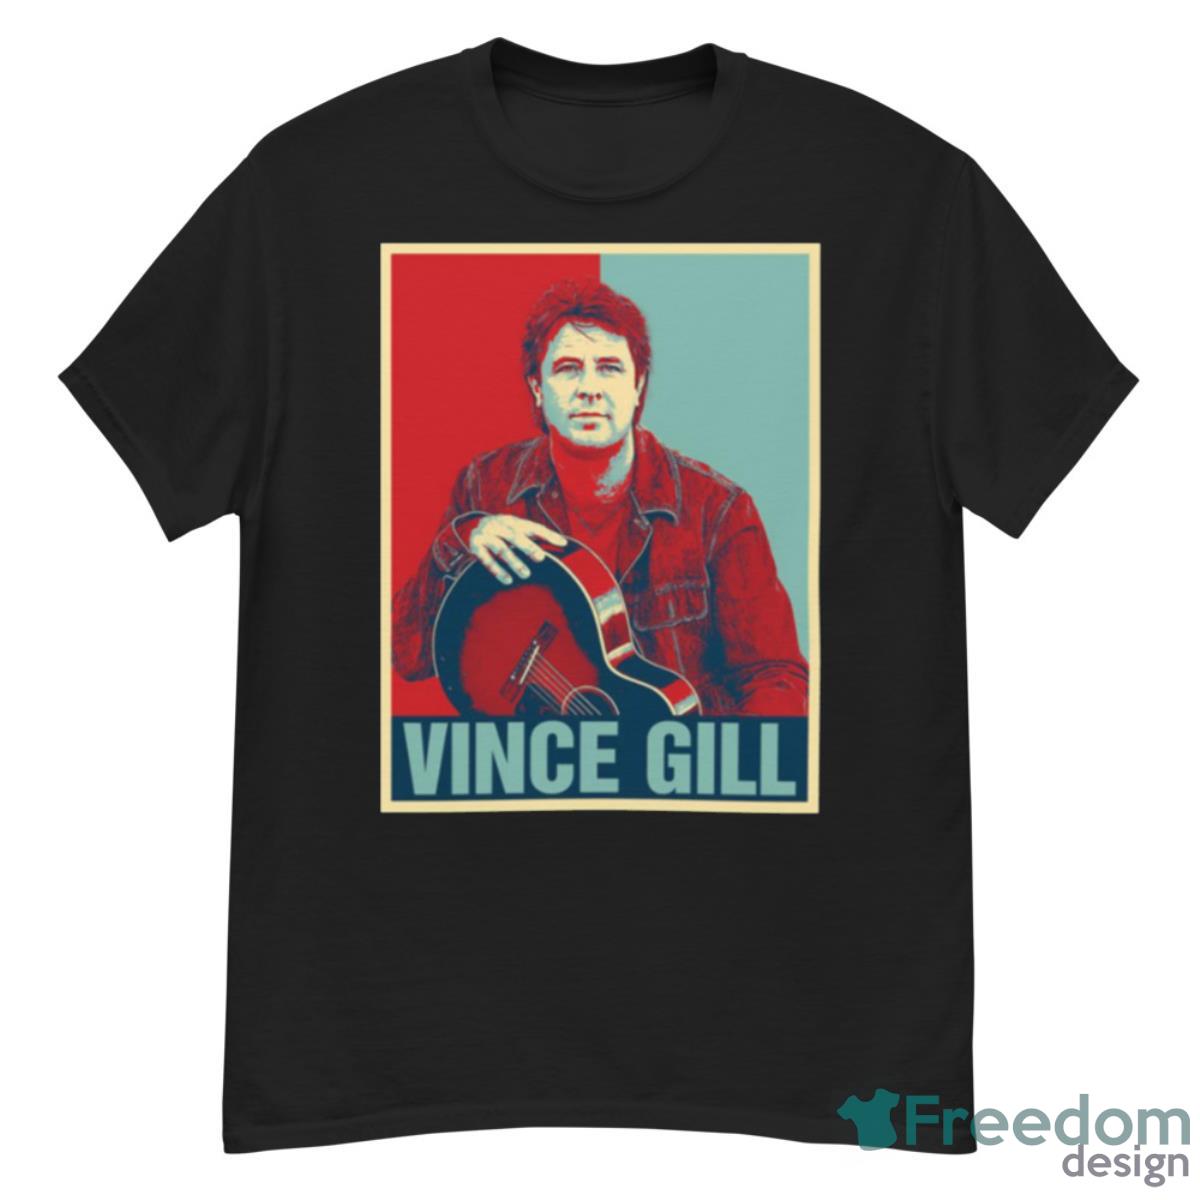 Most Important Style Vince Gill Shirt - G500 Men’s Classic T-Shirt